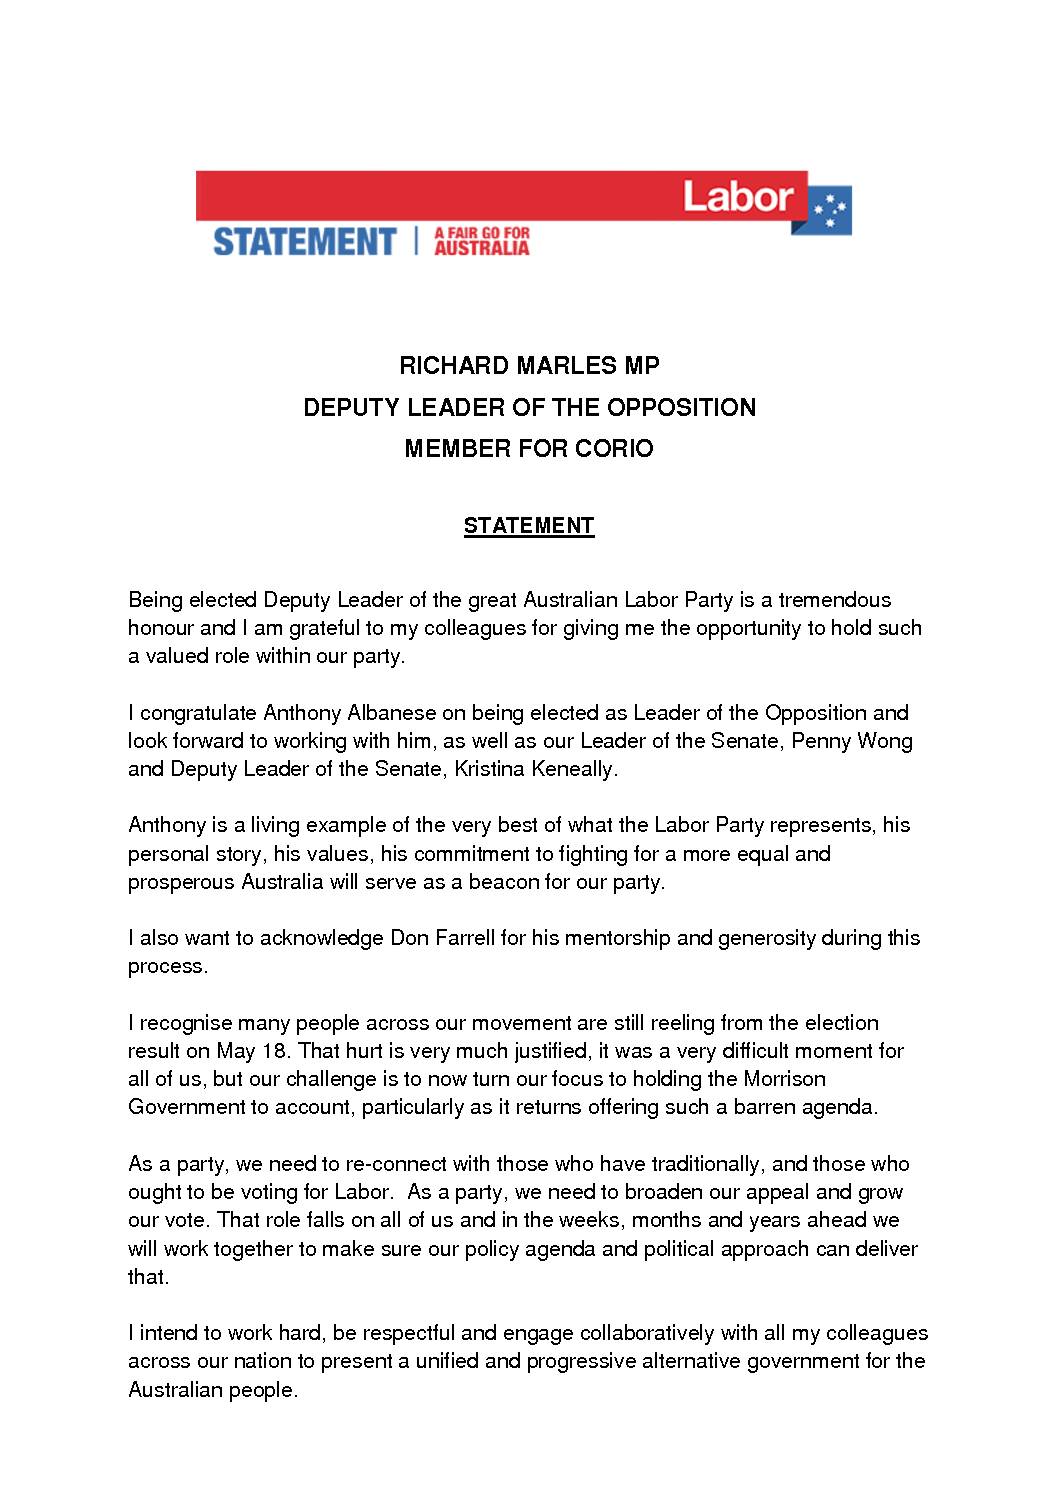 19.05.30 DEPUTY LEADER OF THE OPPOSITION – STATEMENT